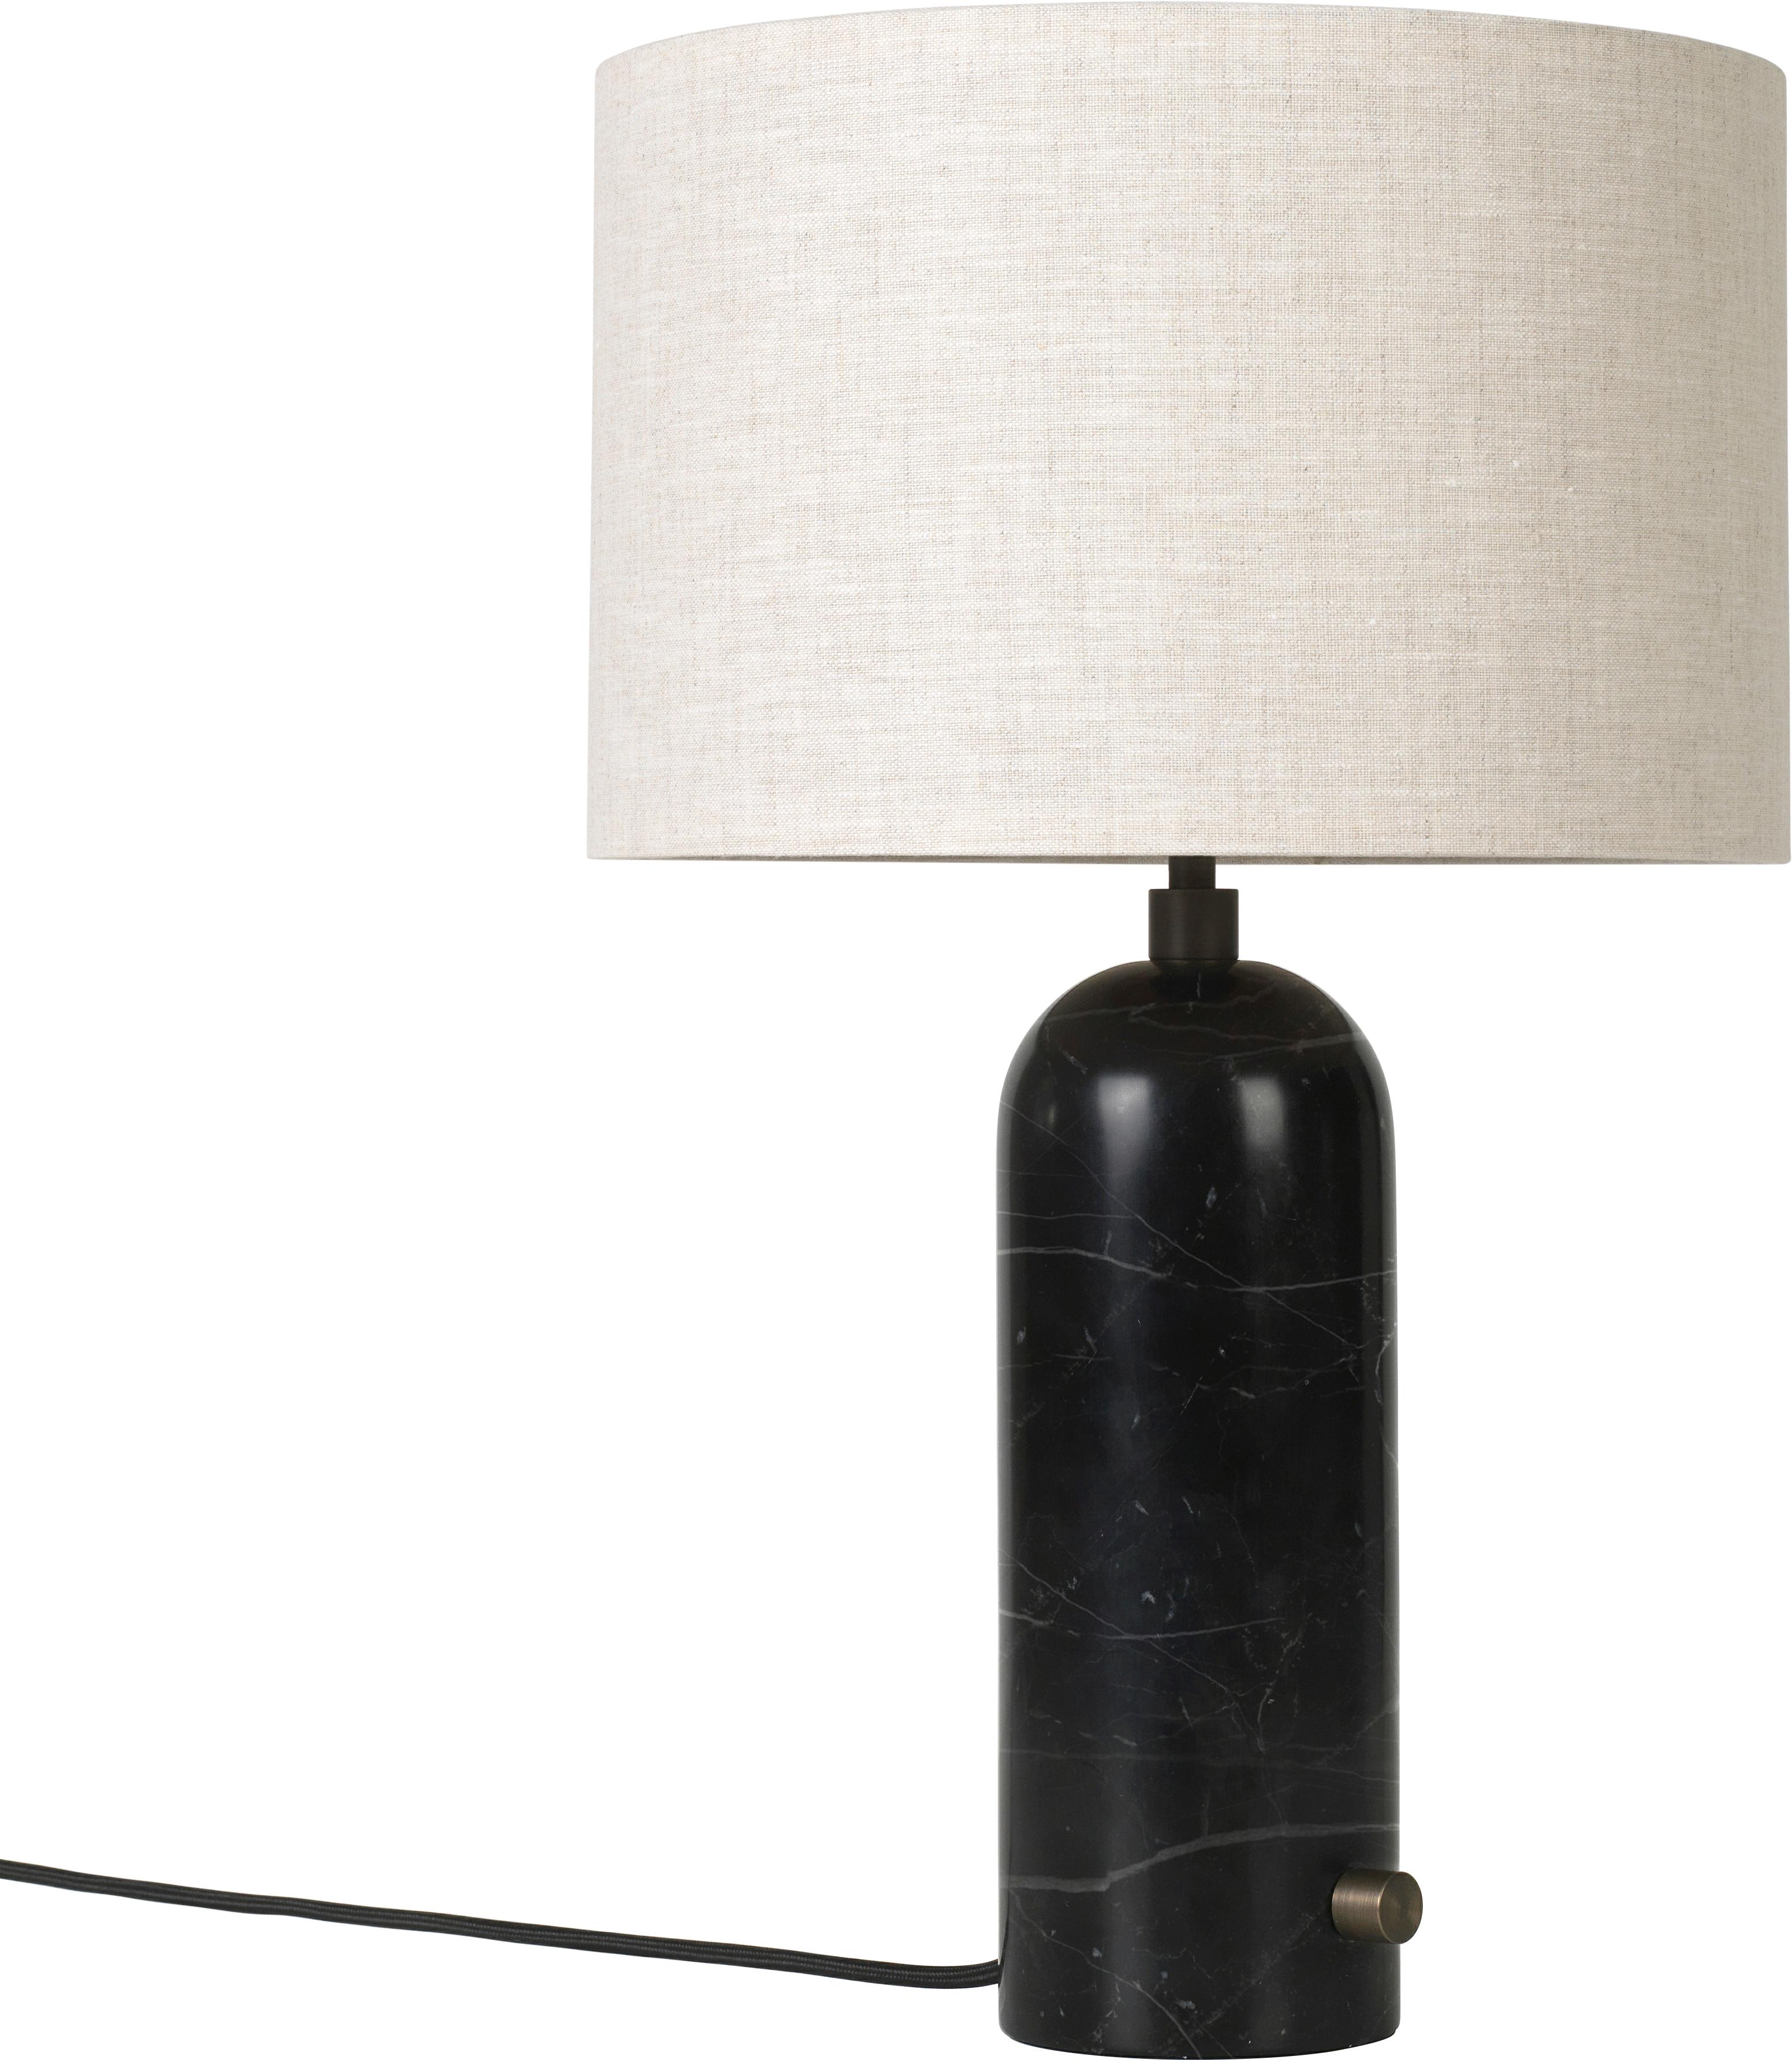 Large 'Gravity' Marble Table Lamp by Space Copenhagen for Gubi in White For Sale 7